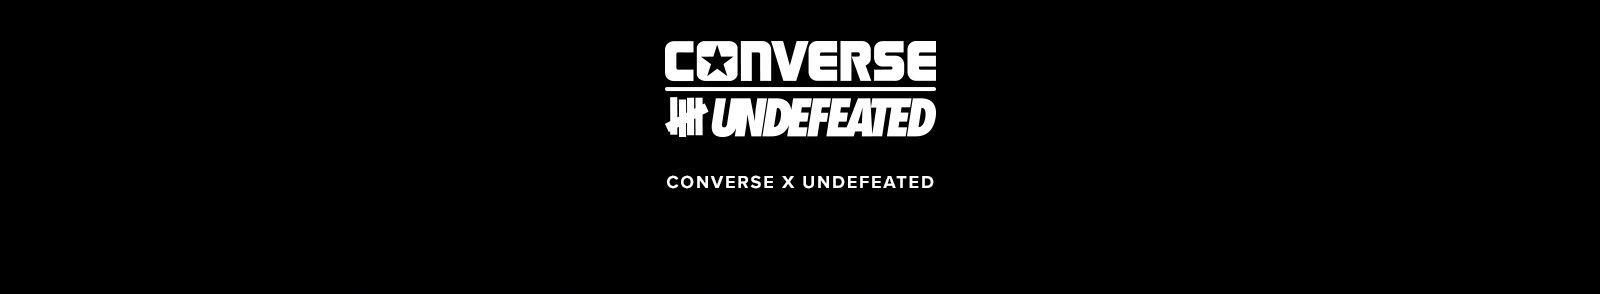 Nike Undefeated Logo - Converse Limited Edition Collection - Undefeated One Star. Converse.com